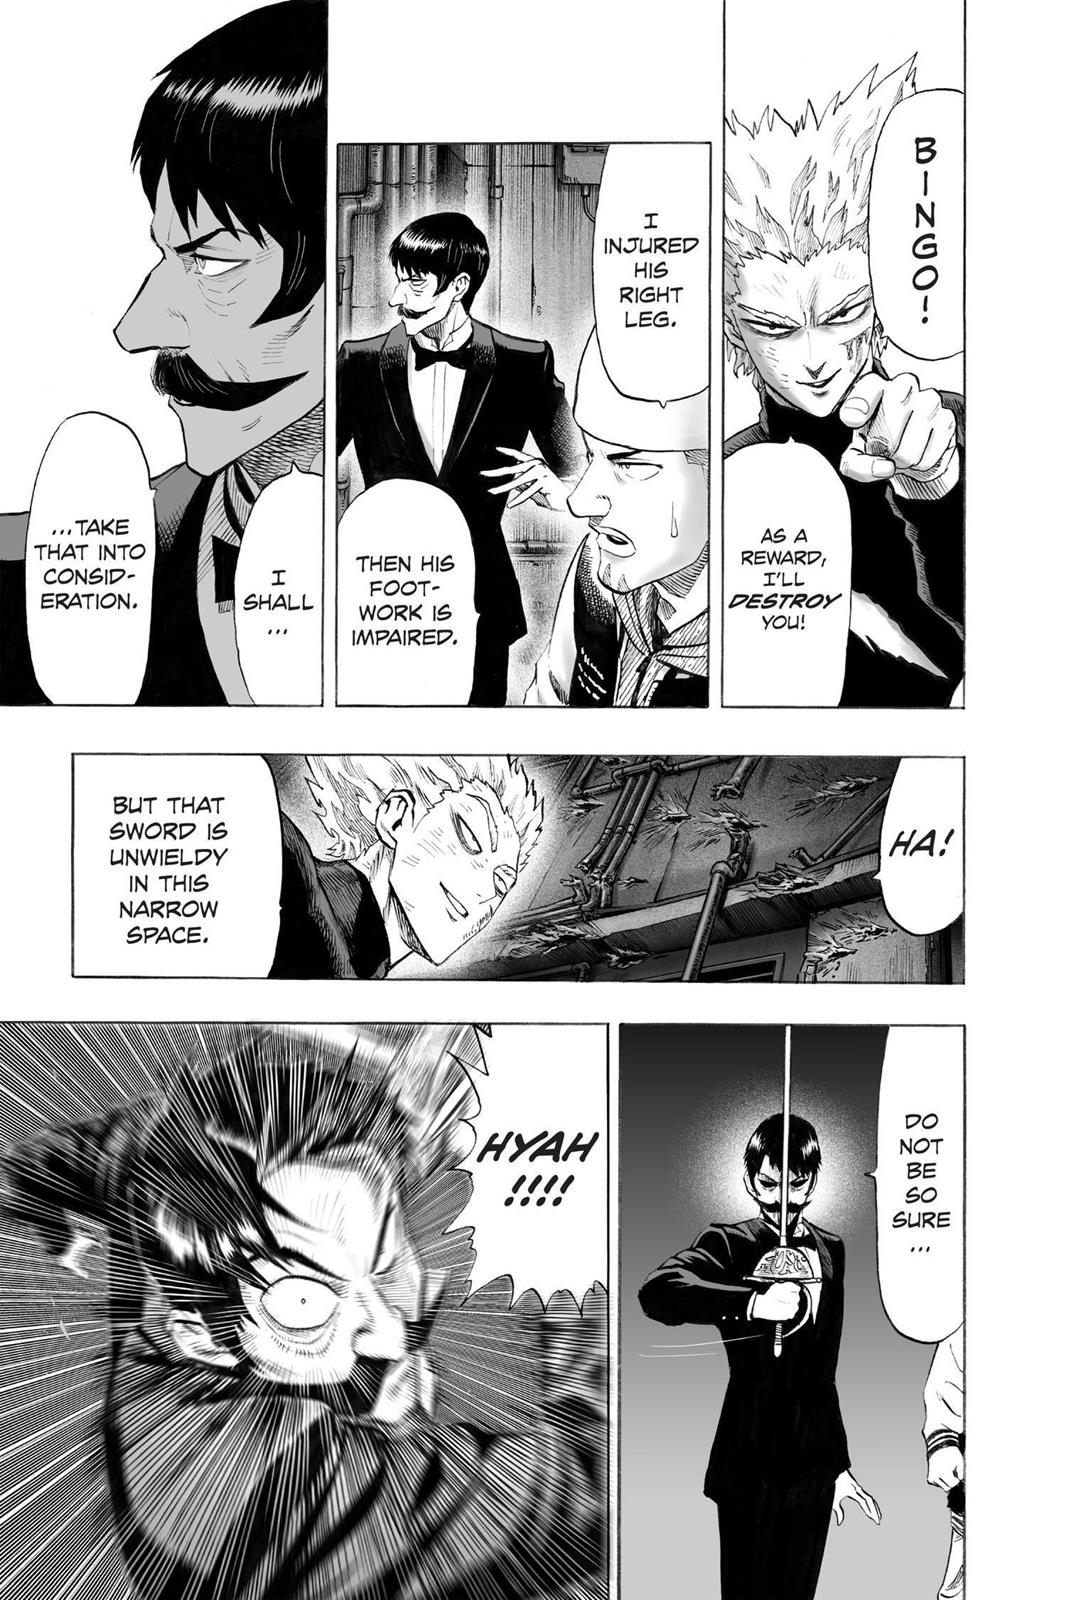 One-Punch Man, Punch 50 image 18